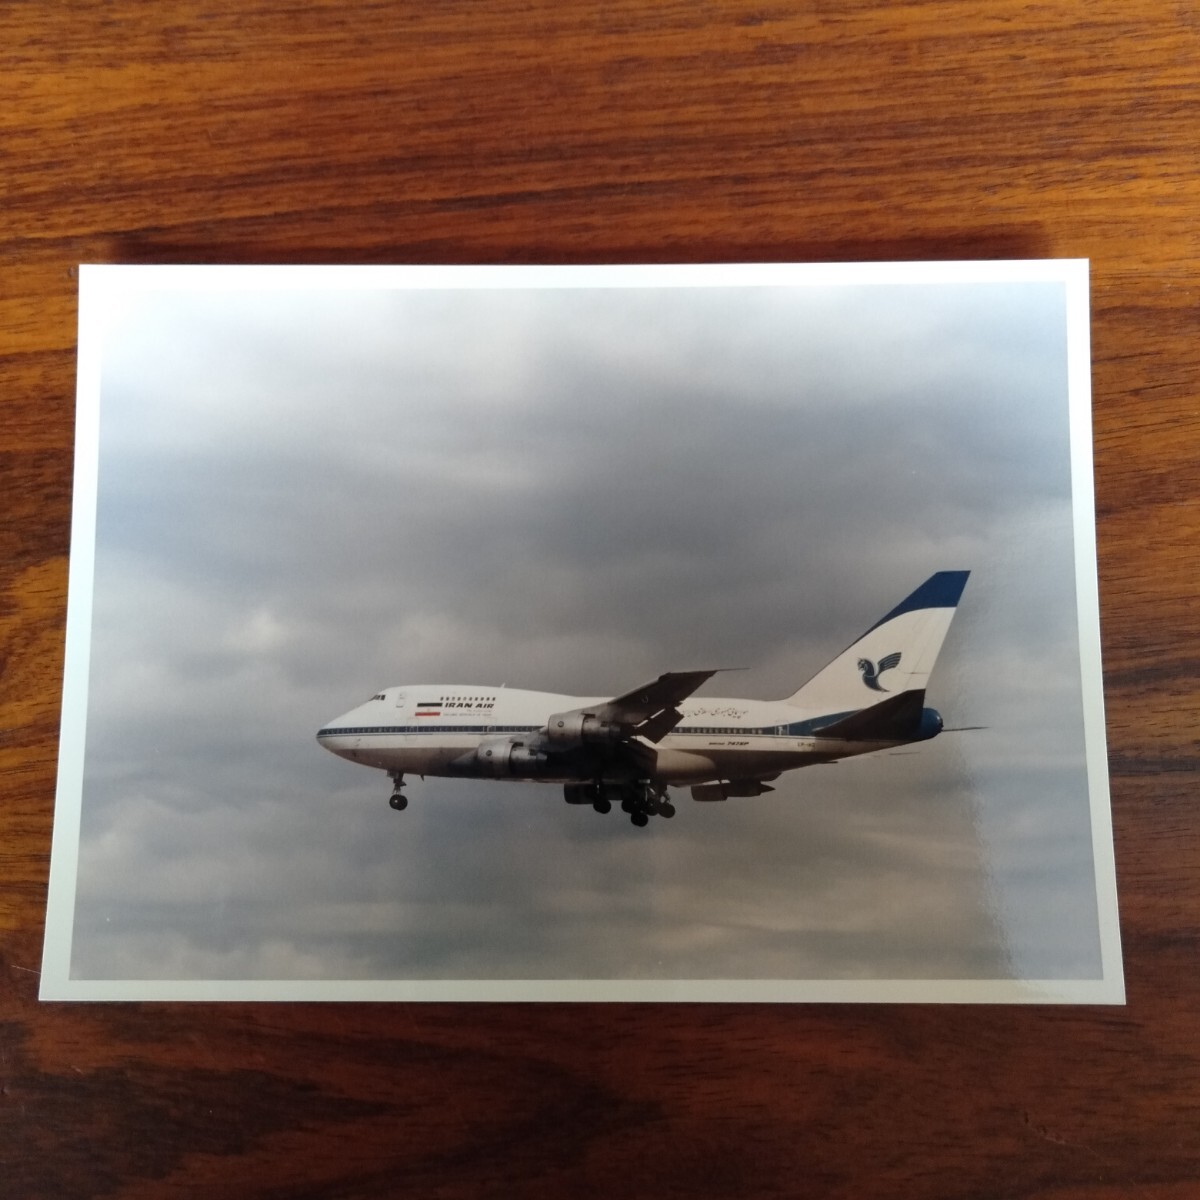 ne261 airplane aircraft passenger plane Thai international aviation PAN AM fins air photograph camera mania . warehouse goods delivery collection 6 sheets together 